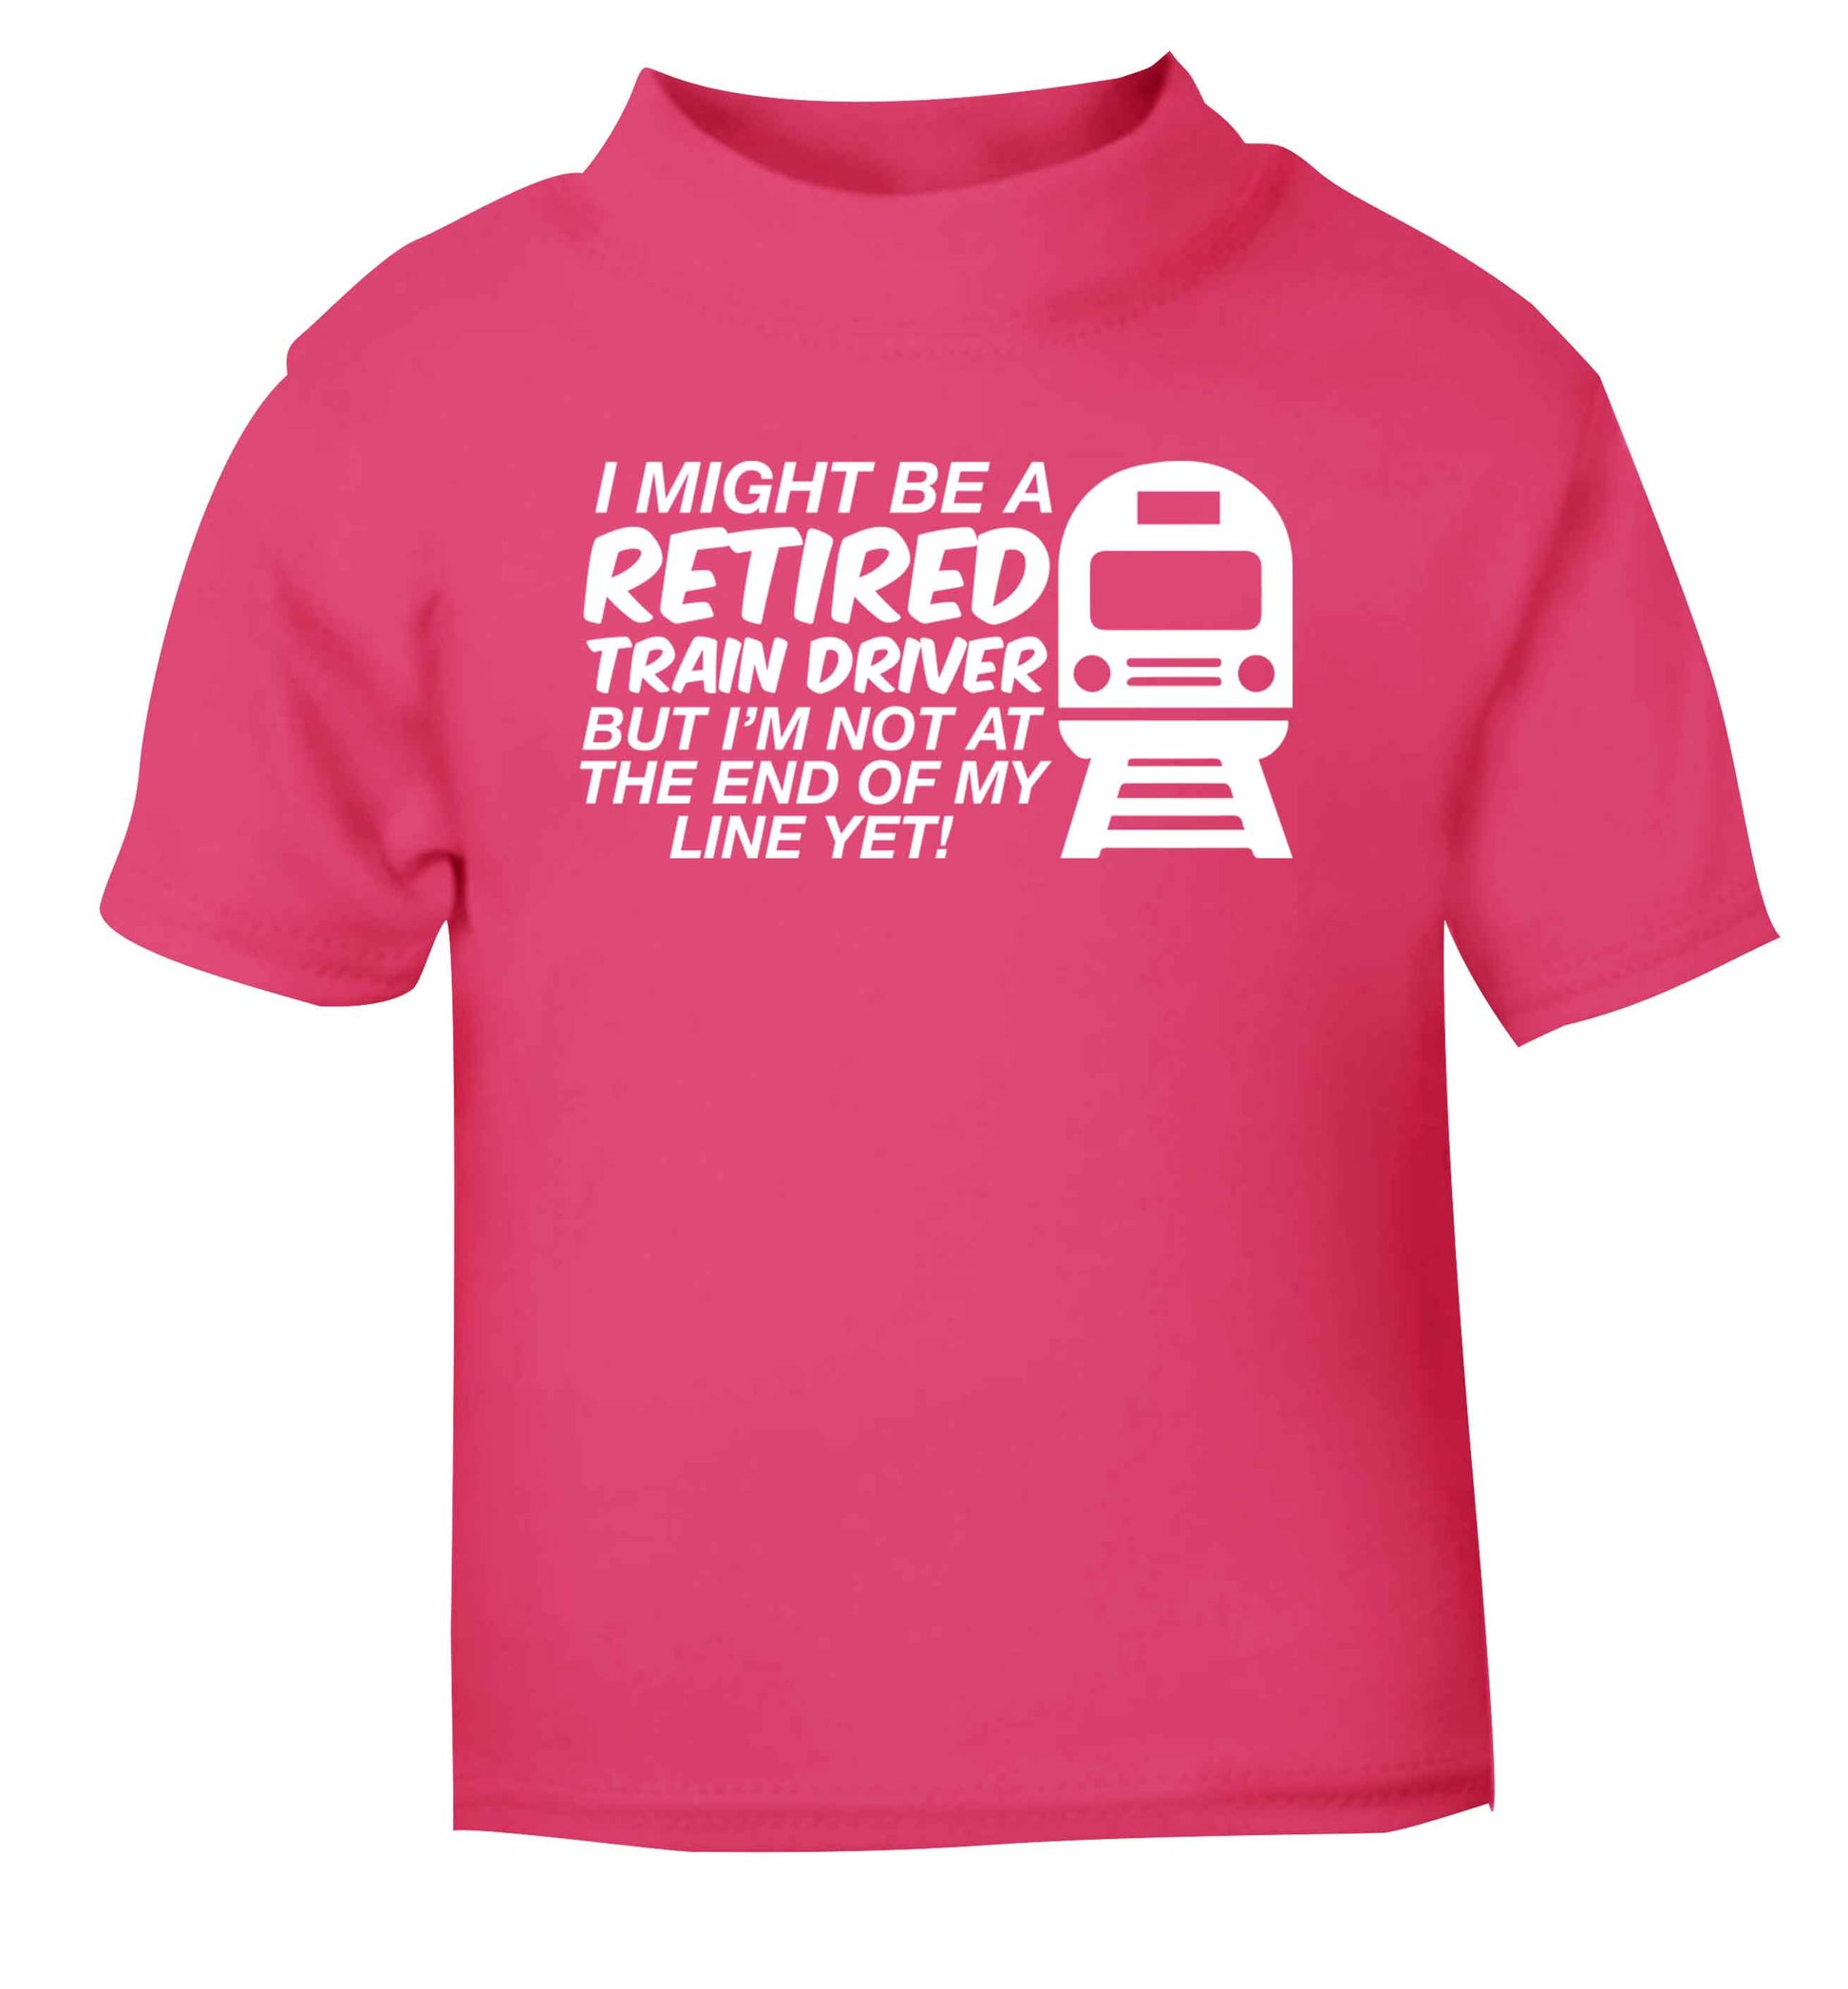 Retired train driver but I'm not at the end of my line yet pink Baby Toddler Tshirt 2 Years